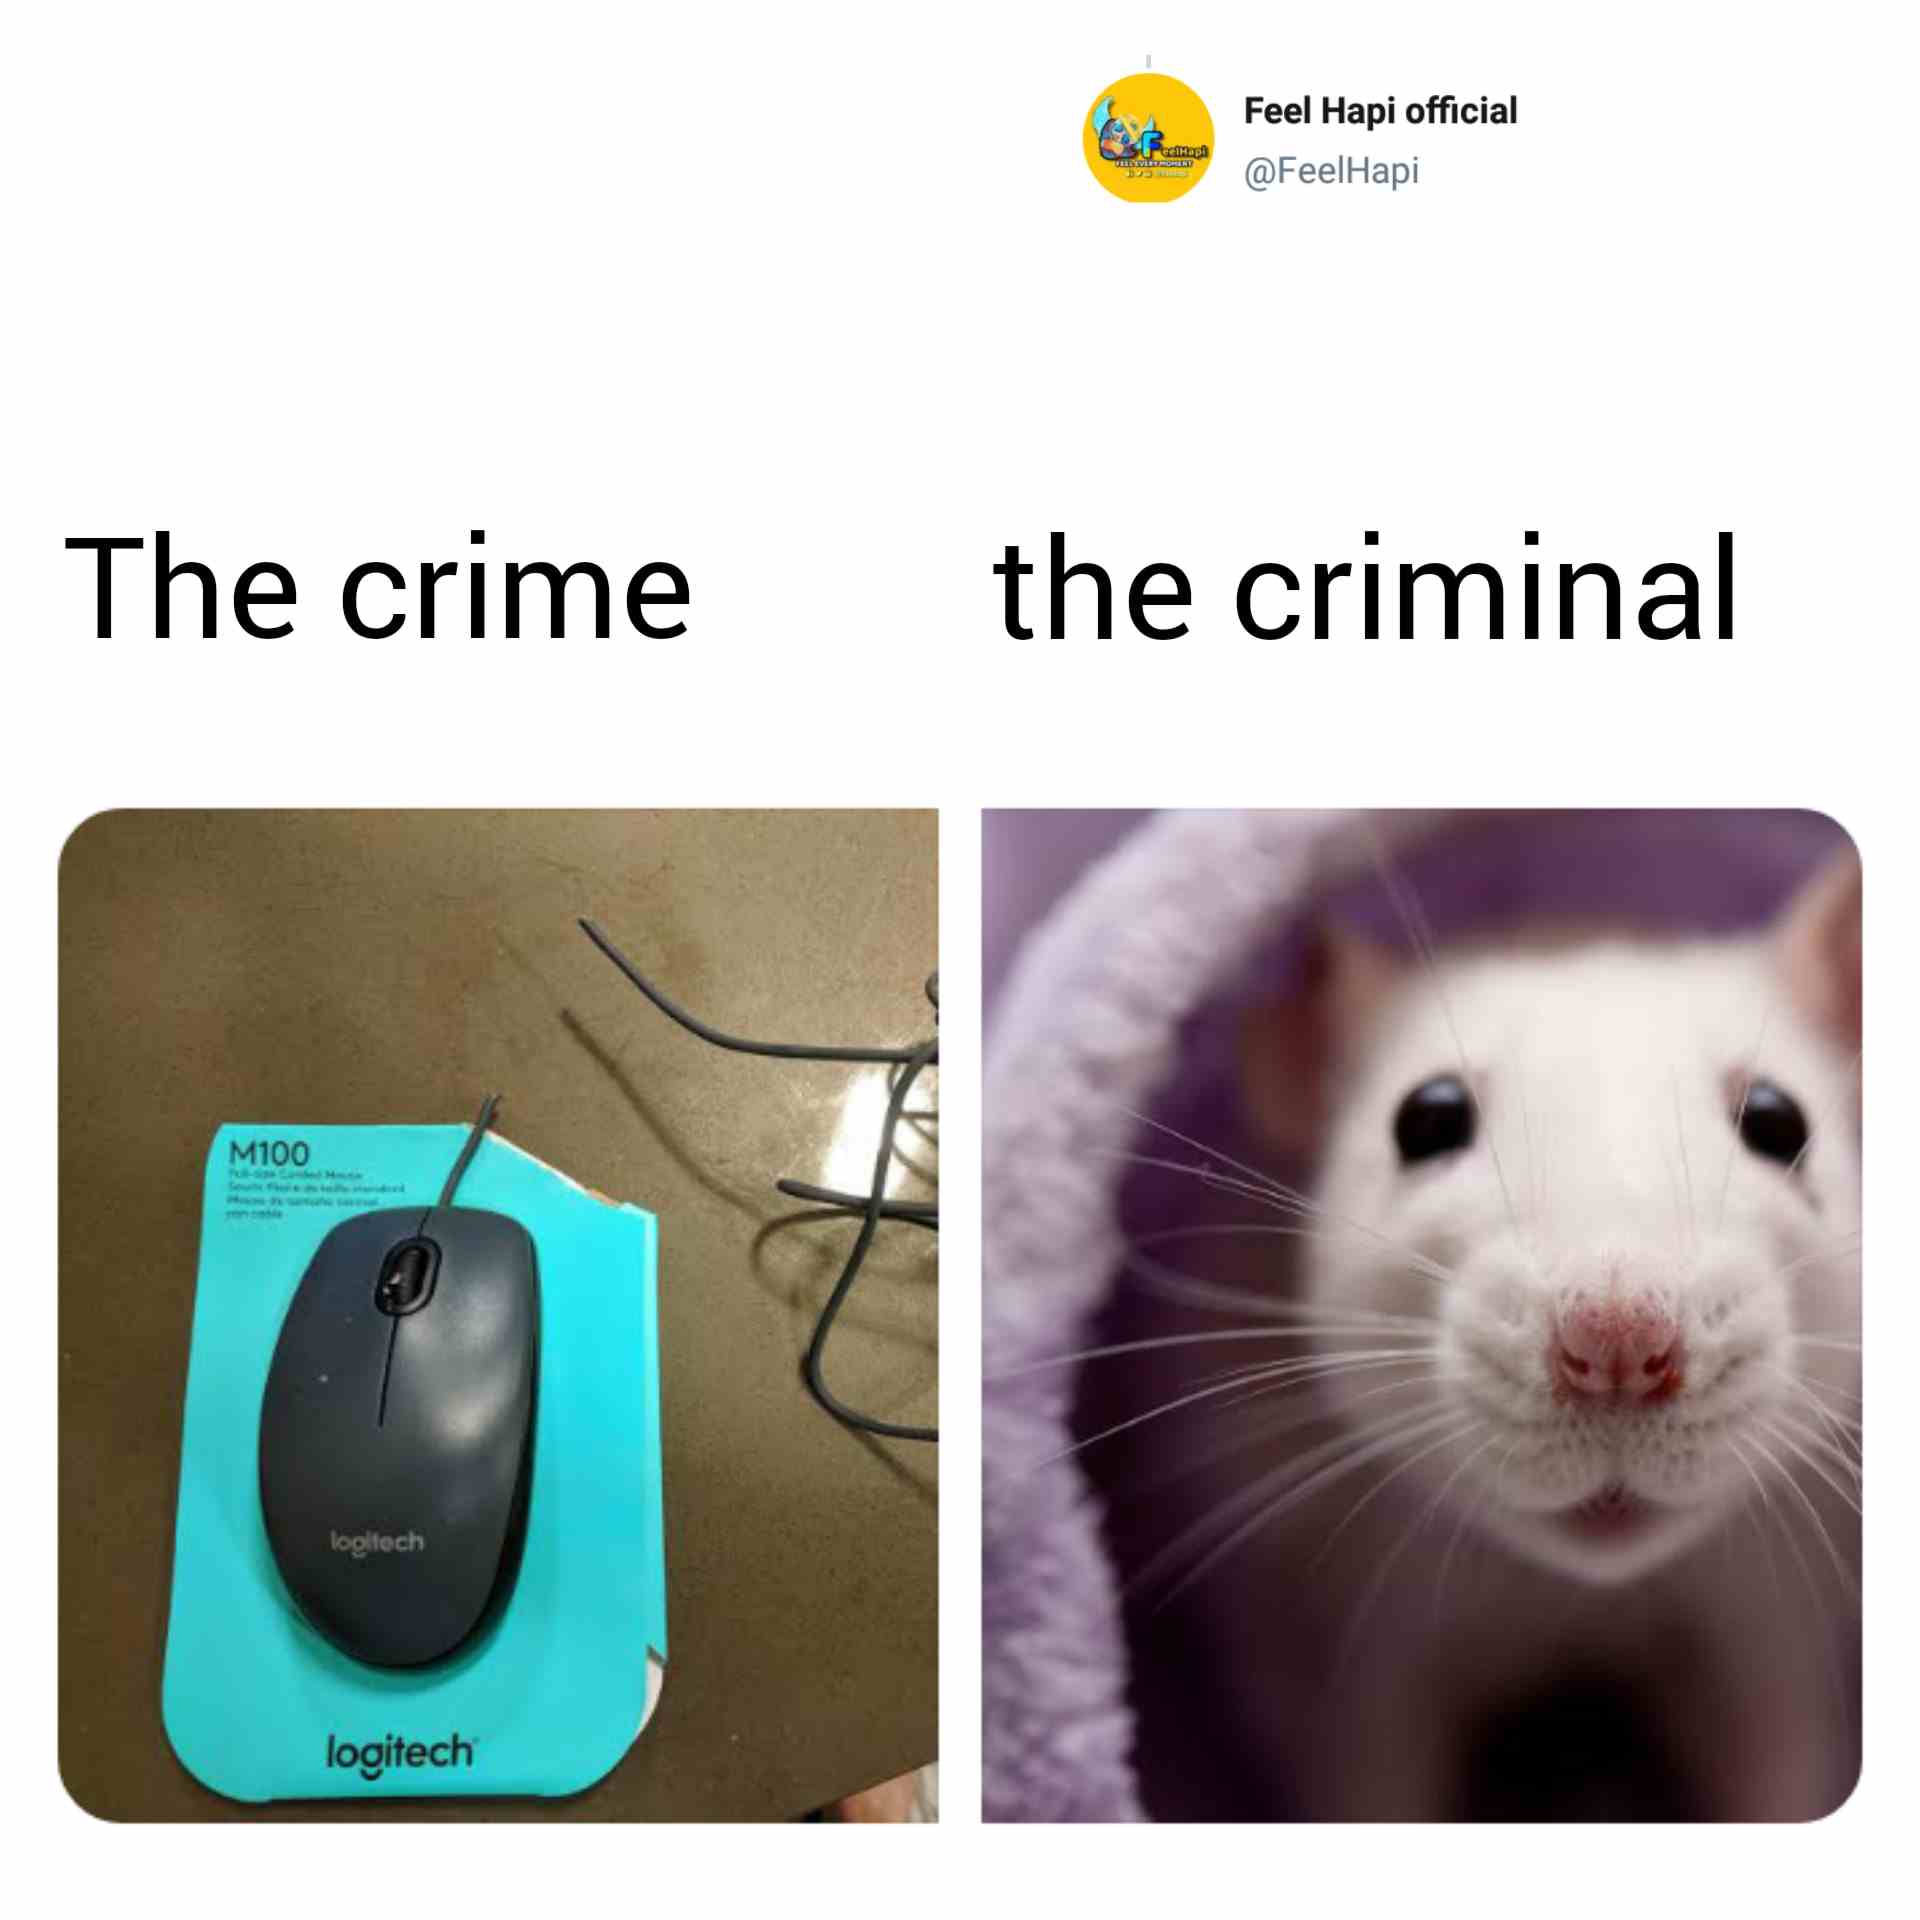 Difference between The crime vs The criminal